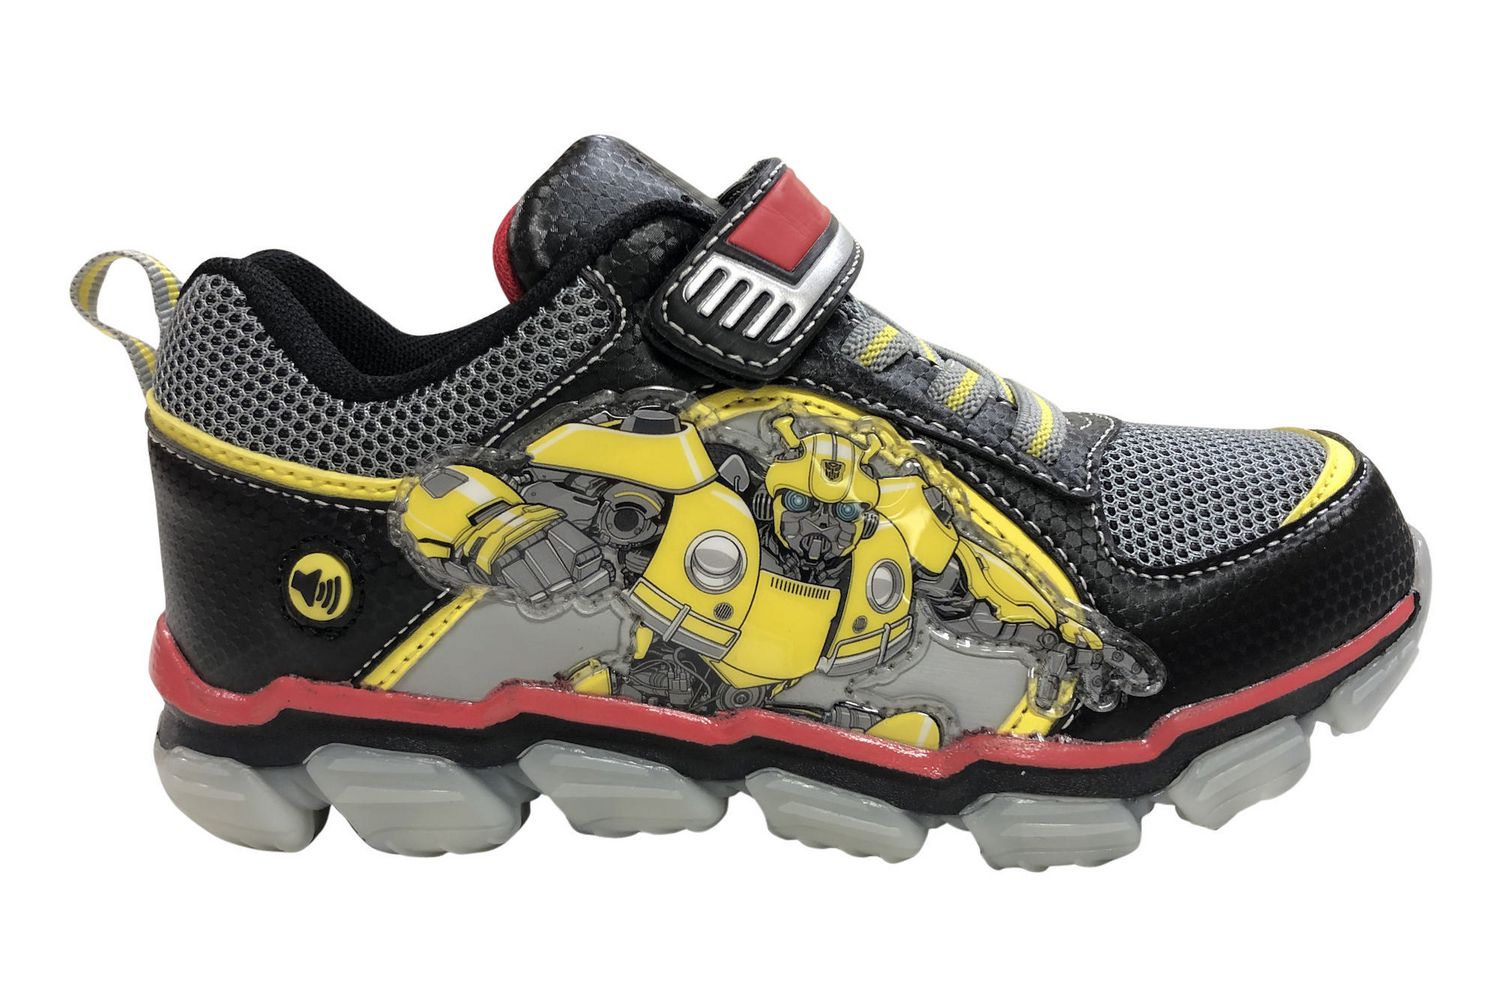 transformers shoes for toddlers